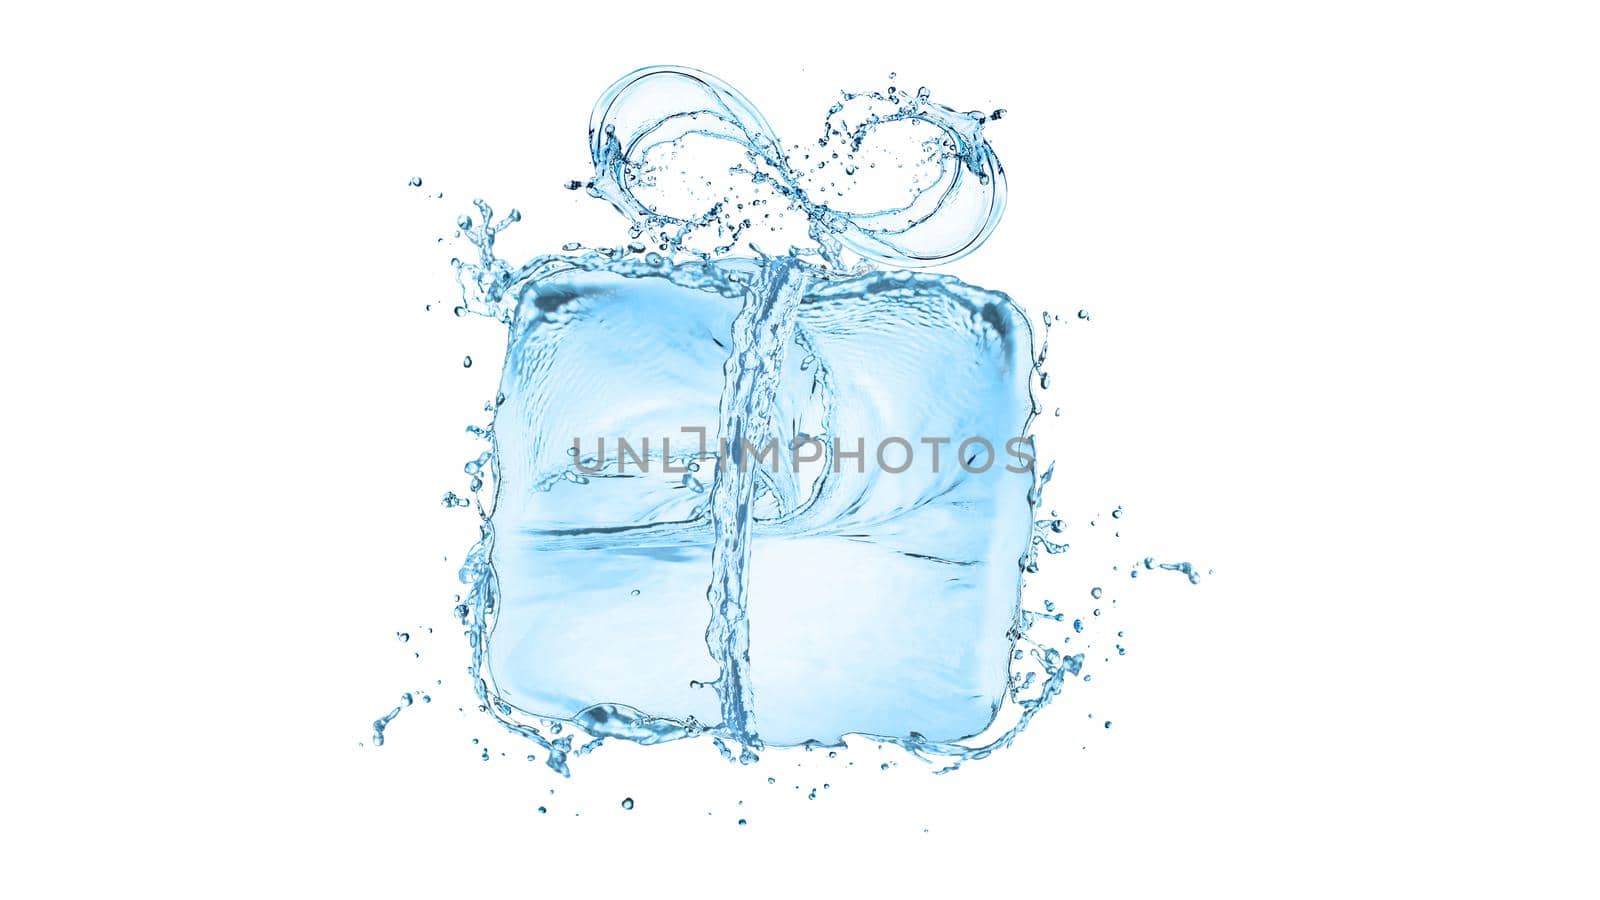 Water splash with gift box shape by Wasant